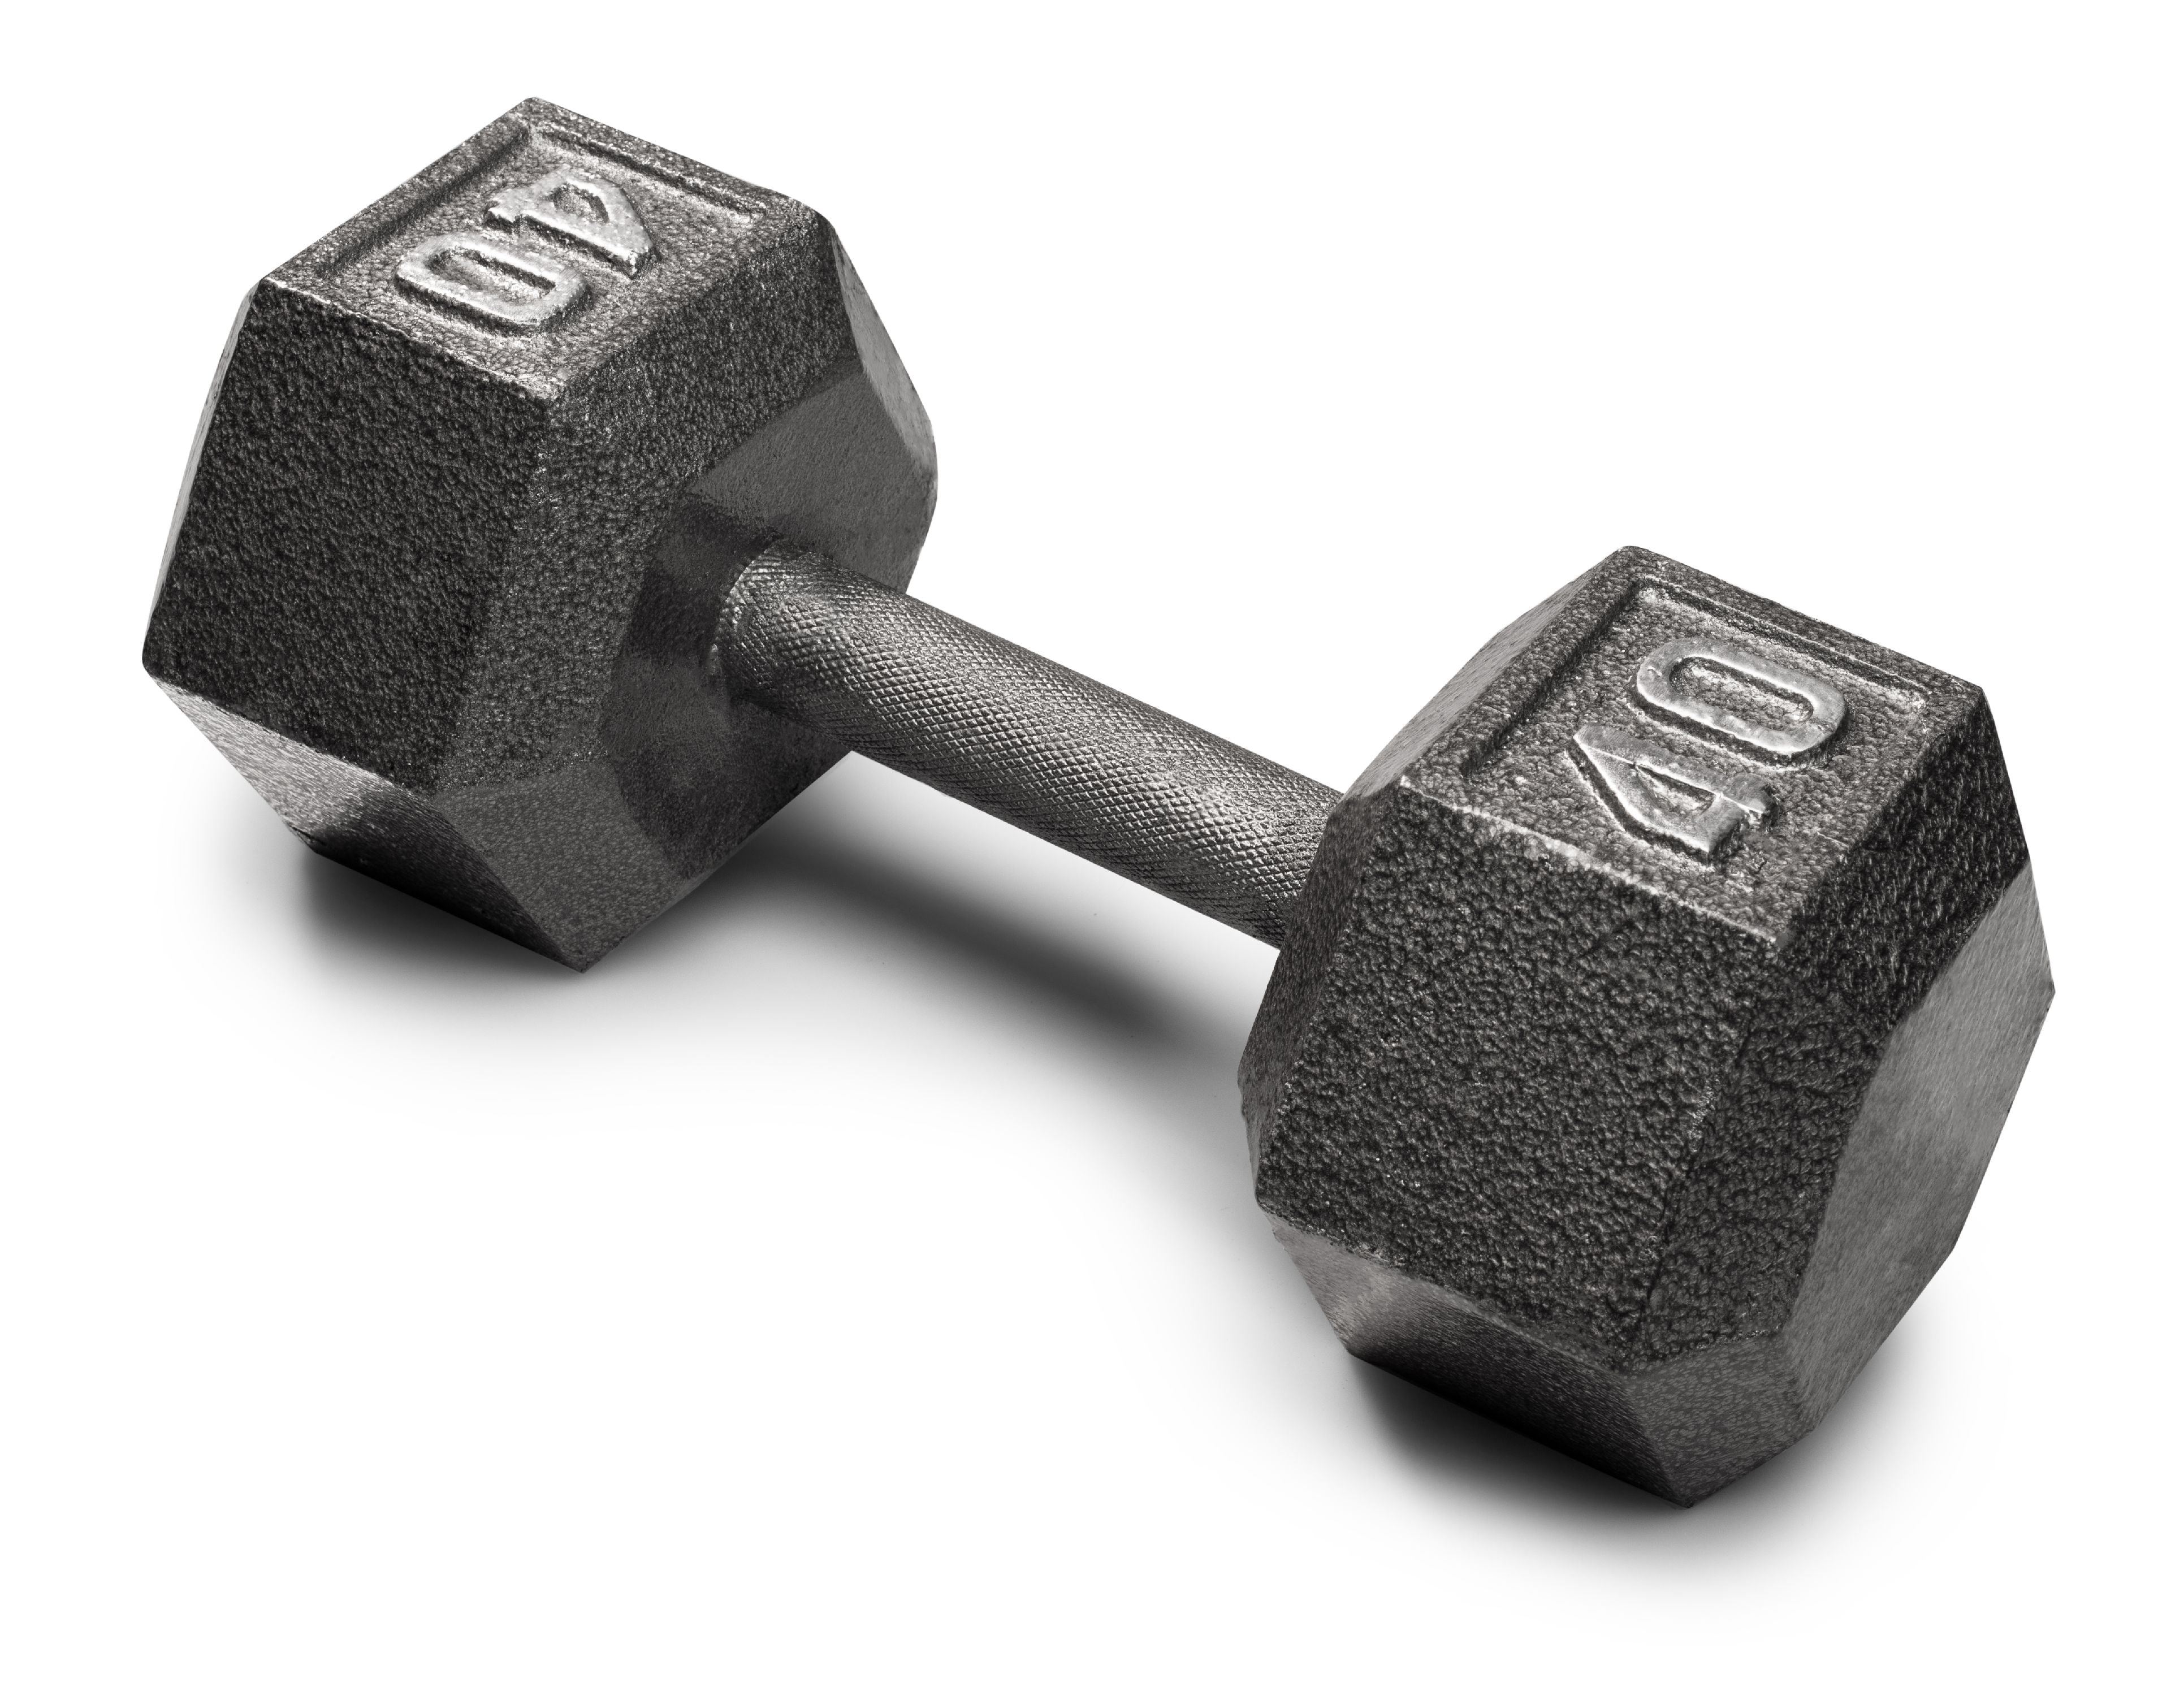 Rubber Hex Dumbbell Rubber Hex Dumbbells - 2.5 to 120 lb a-Weight 50 lb. 